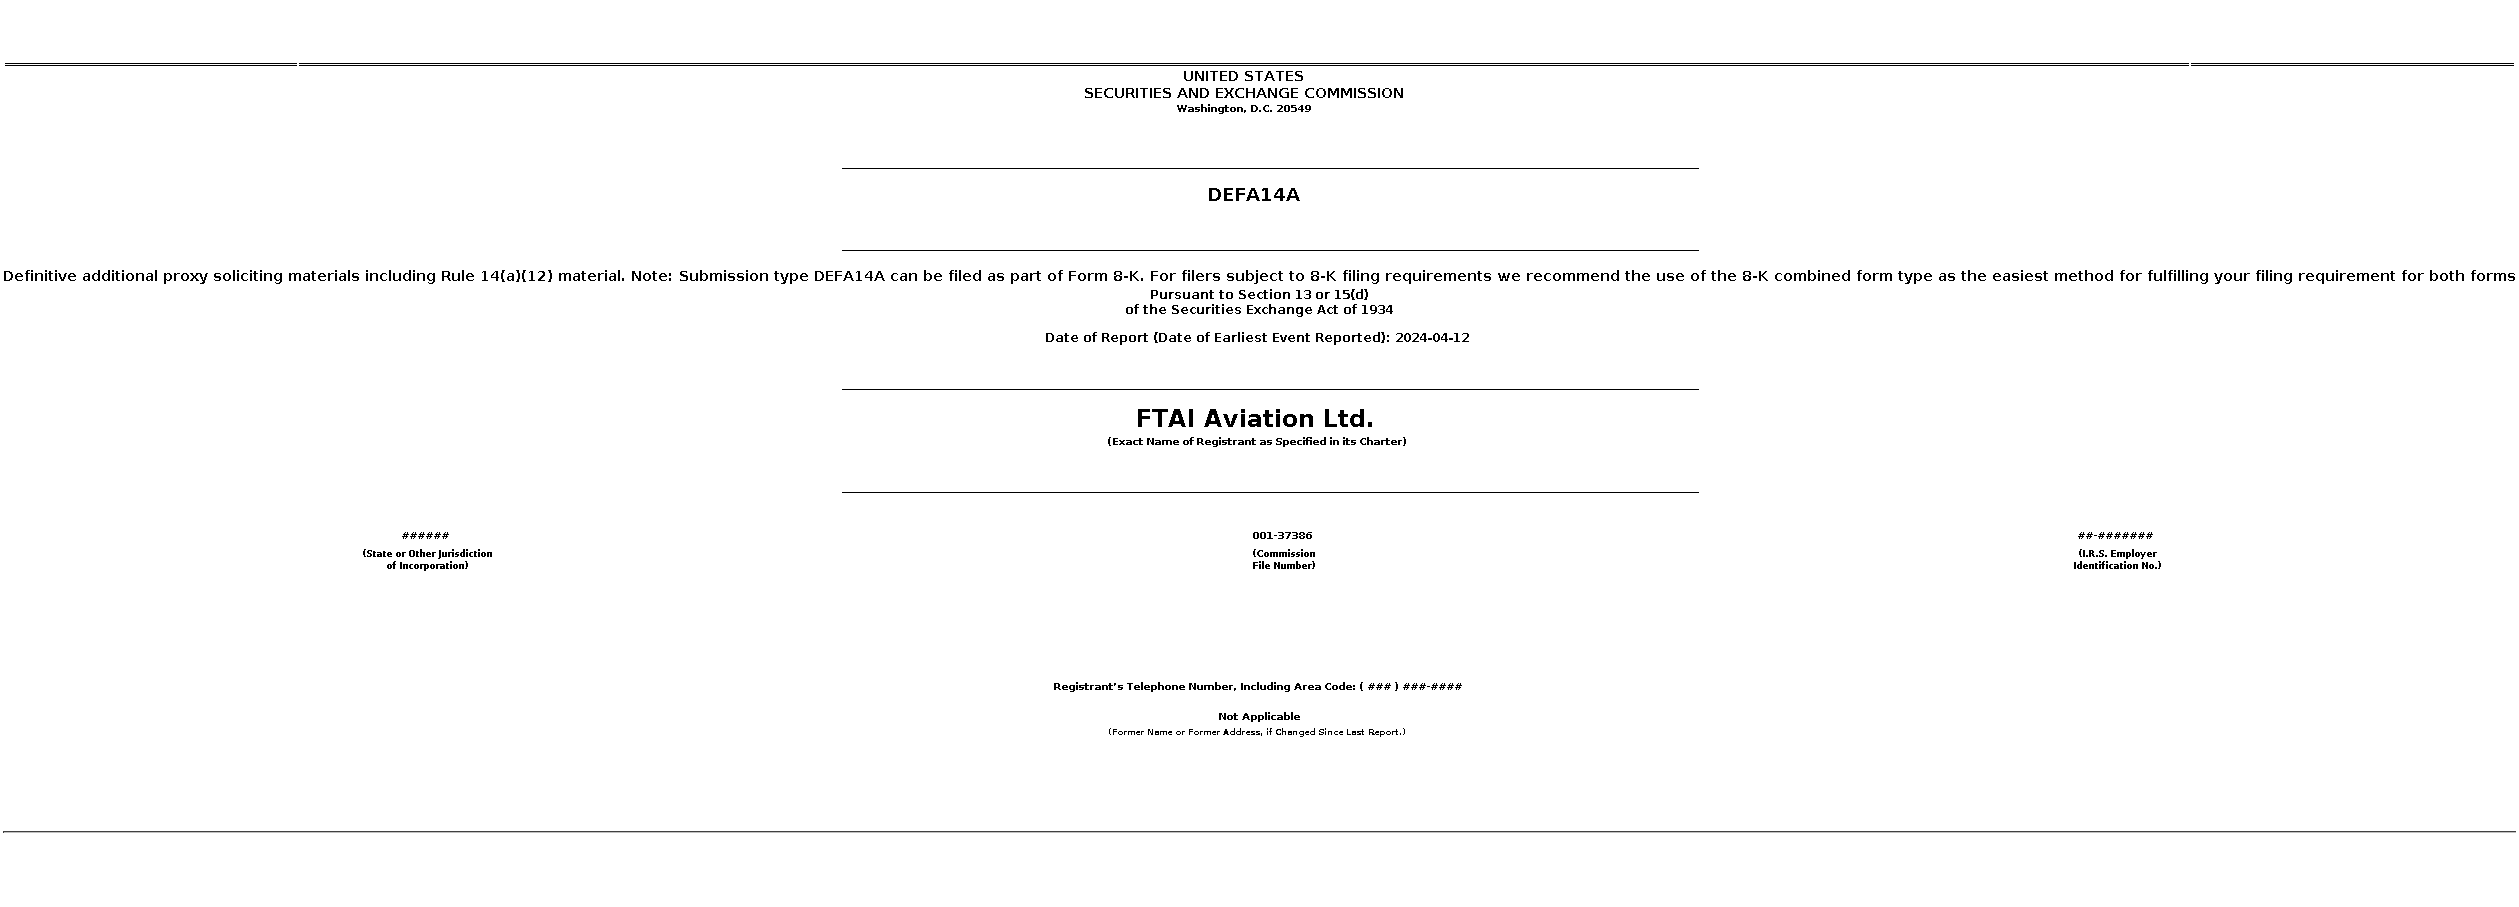 FTAI : DEFA14A Definitive additional proxy soliciting materials including Rule 14(a)(12) material. Note: Submission type DEFA14A can be filed as part of Form 8-K. For filers subject to 8-K filing requirements we recommend the use of the 8-K combined form type as the easiest method for fulfilling your filing requirement for both forms